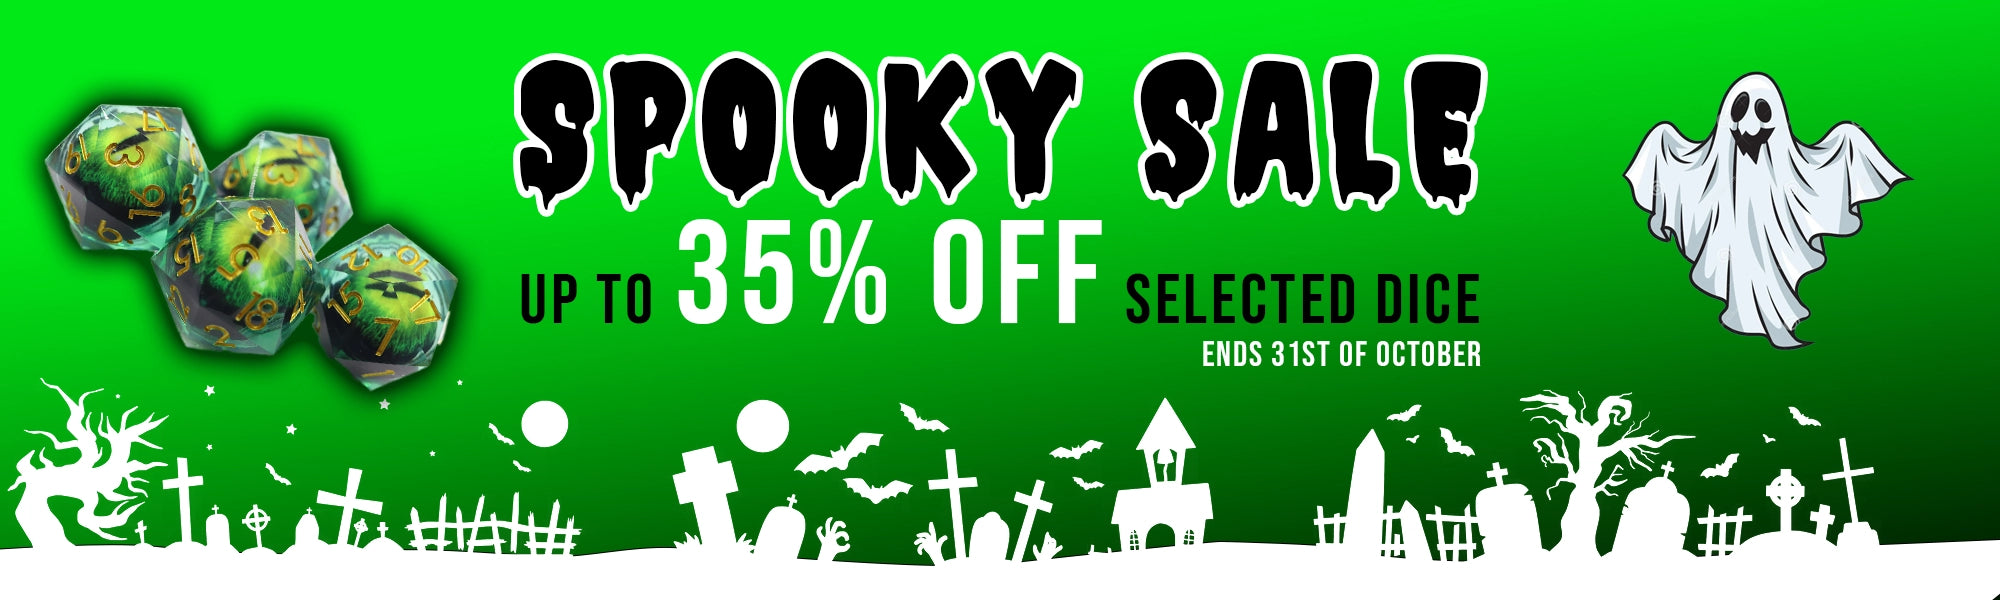 A green and black banner with halloween themed assests for tabletop dominions spooky Halloween sale